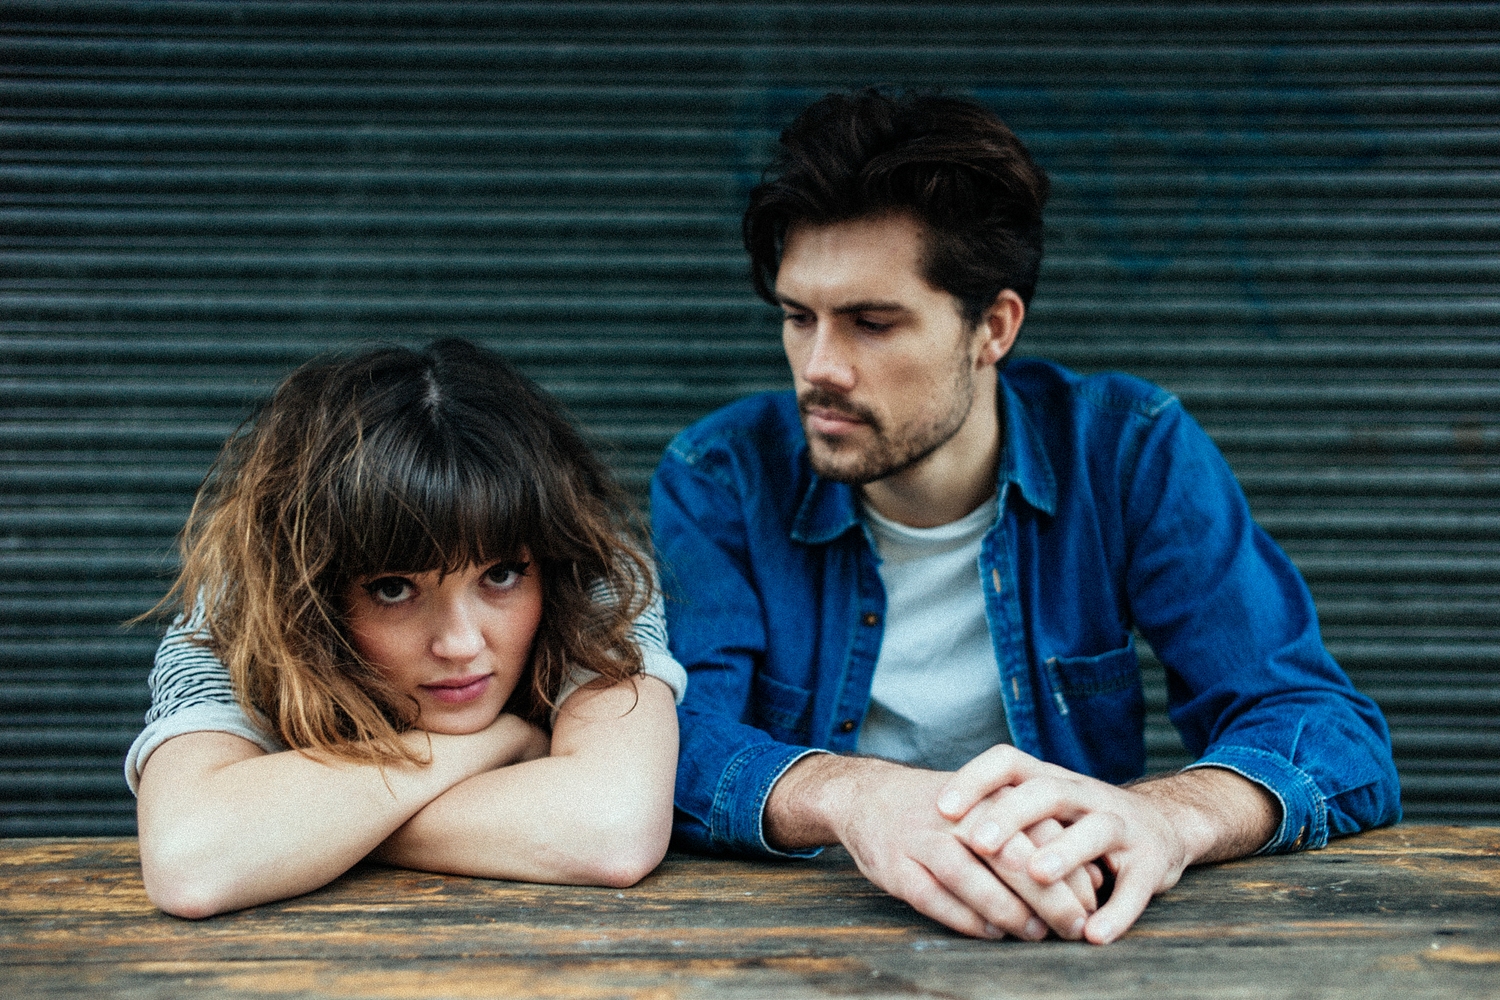 Oh Wonder air final preview of debut album with ‘Heart Hope’